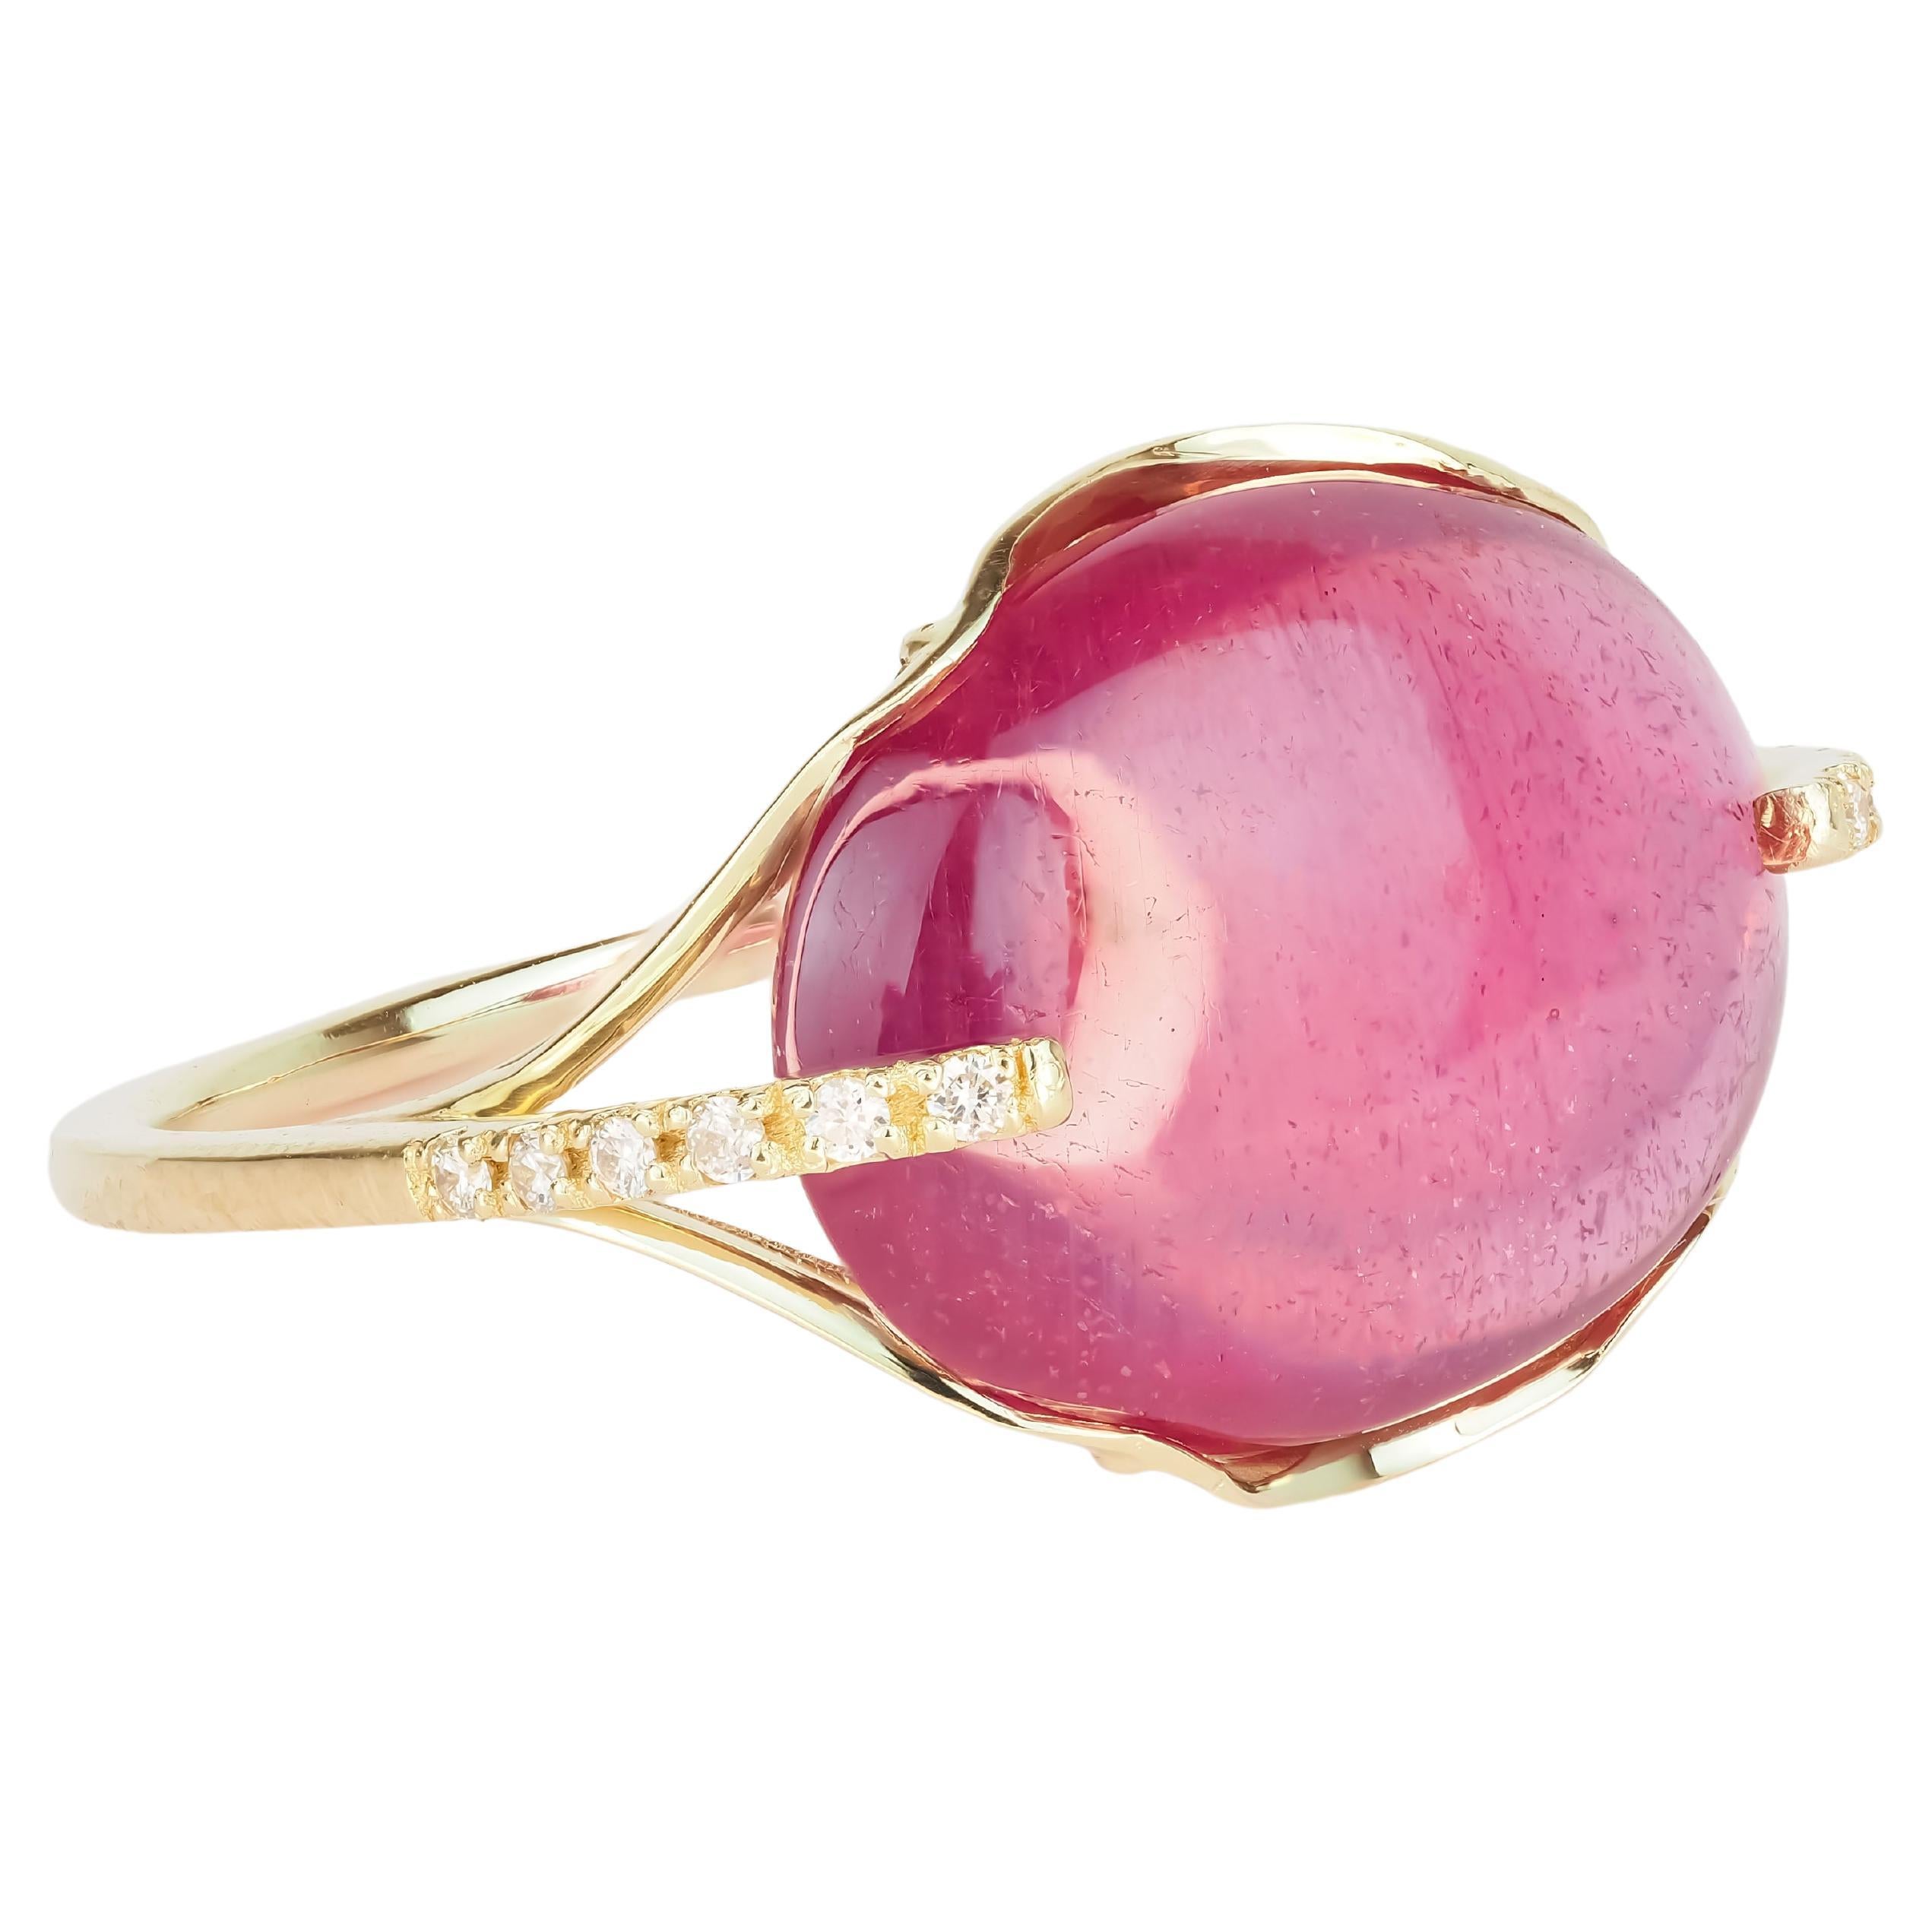 Women's 14 Karat Gold Ring with Cabochon Ruby and Diamonds. July birthstone ruby ring